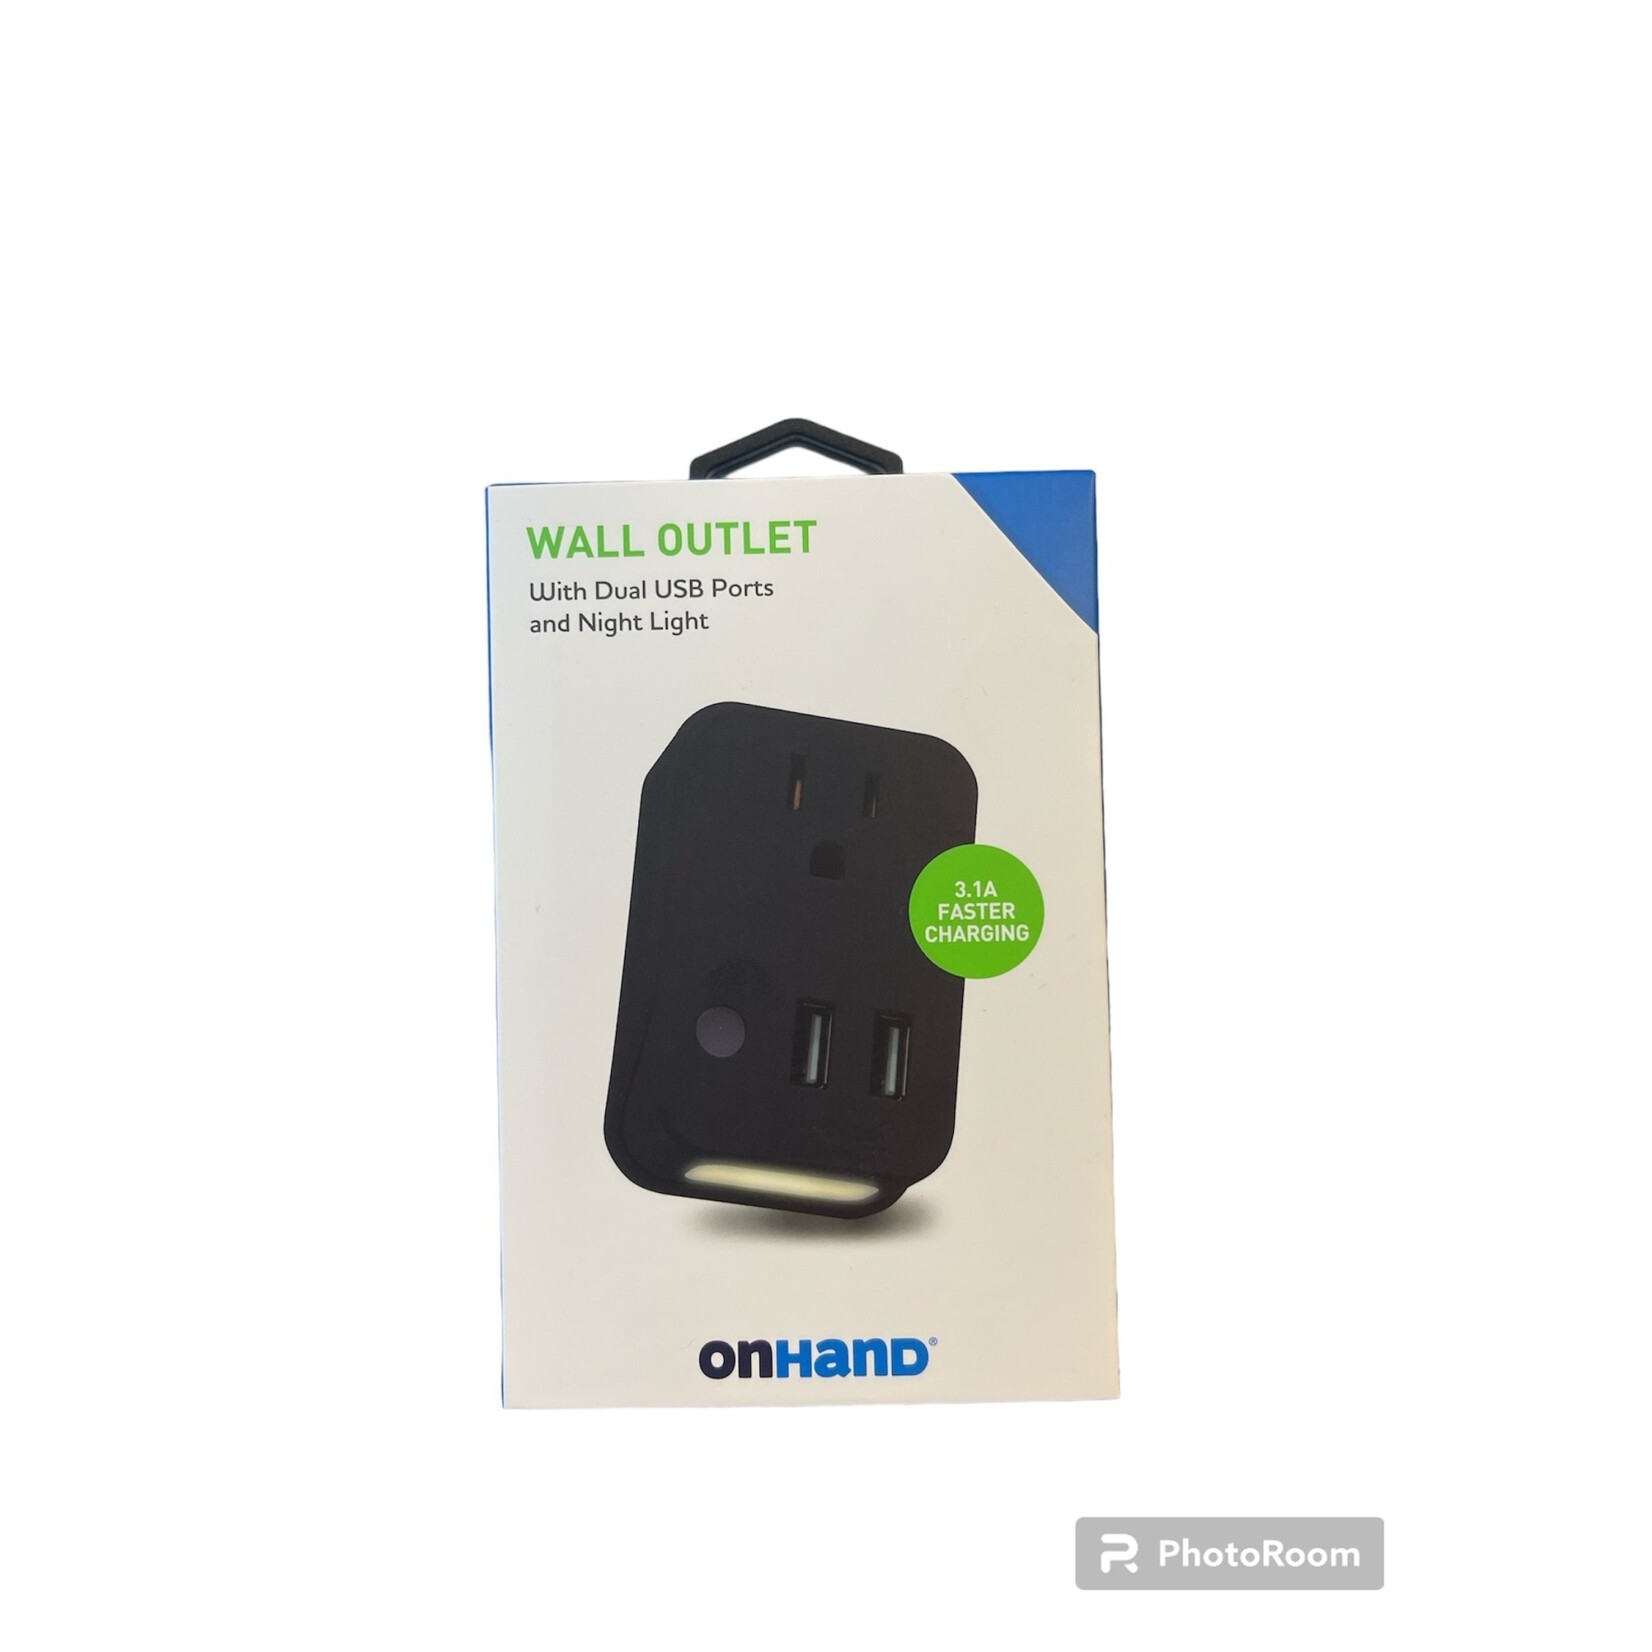 OnHand Wall Outlet w/ dual USB ports and Night Light